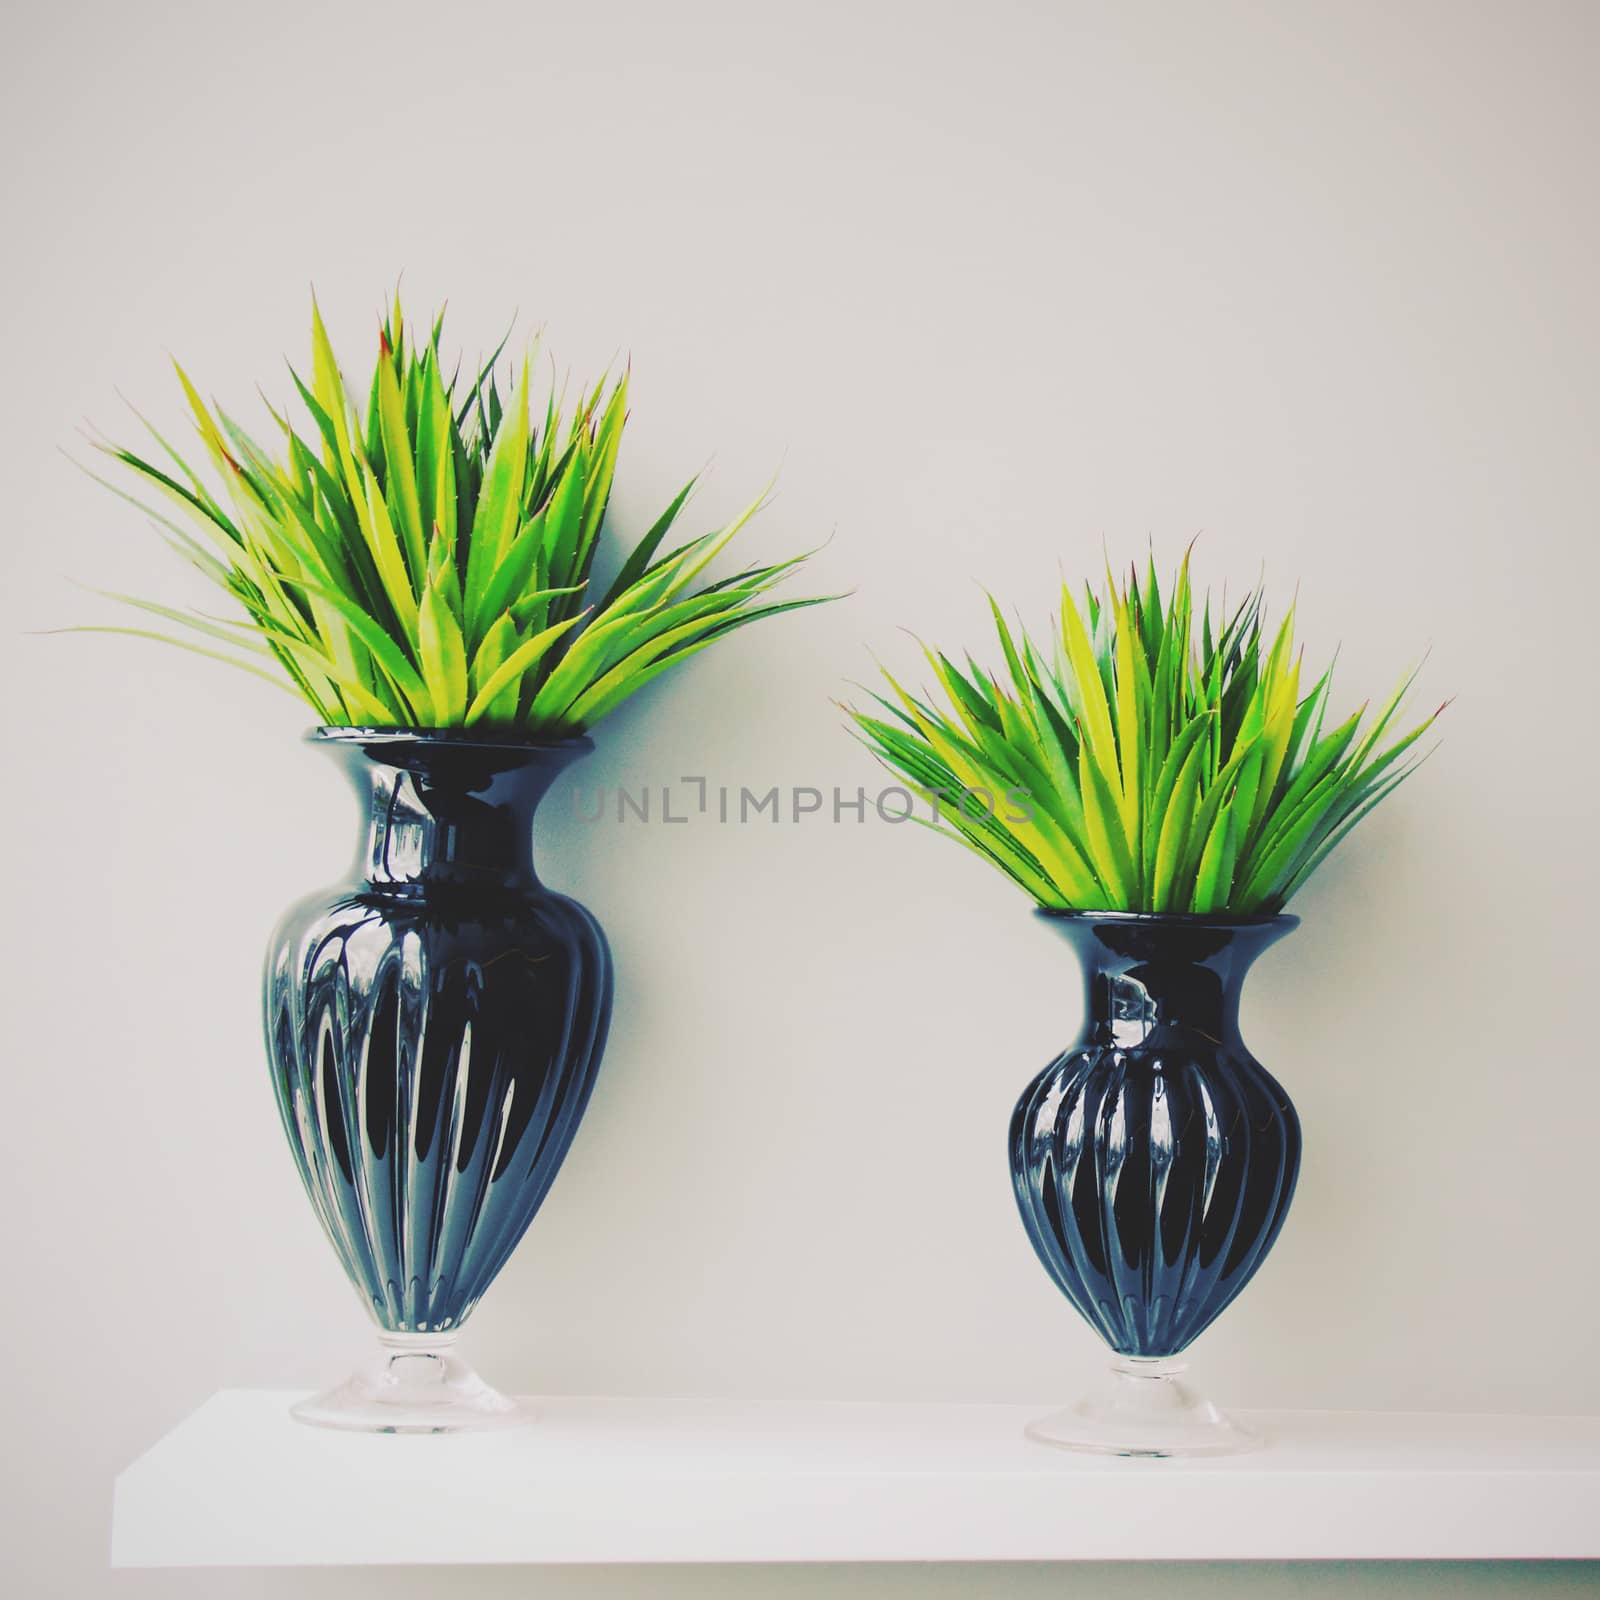 Plant in black vase decorated for room, retro filter effect by nuchylee